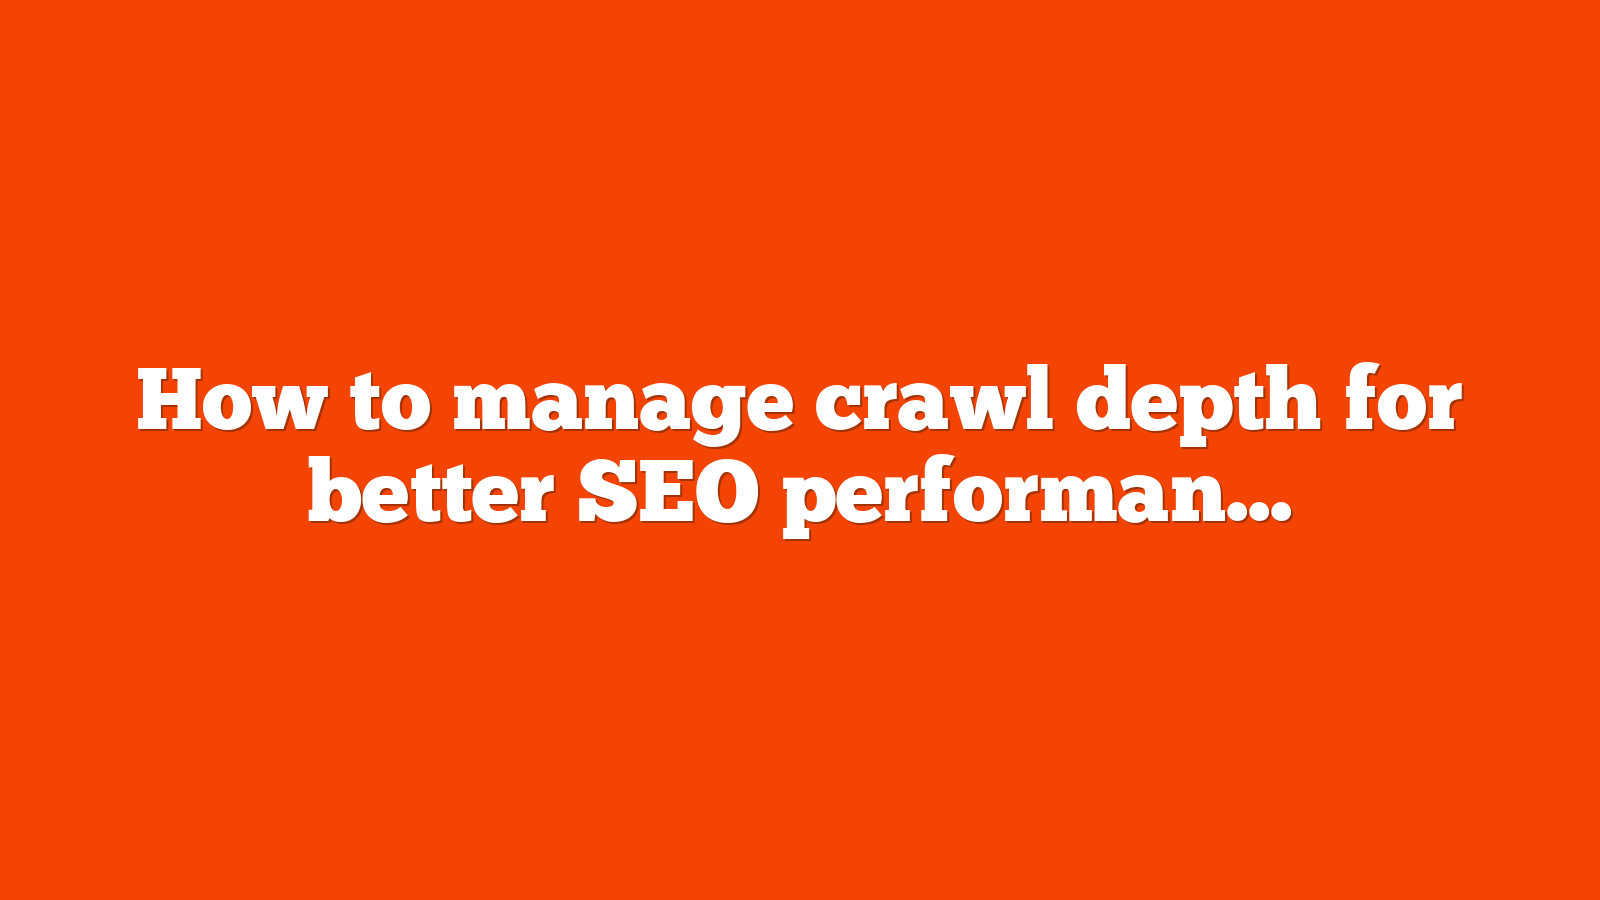 How to manage crawl depth for better SEO performance